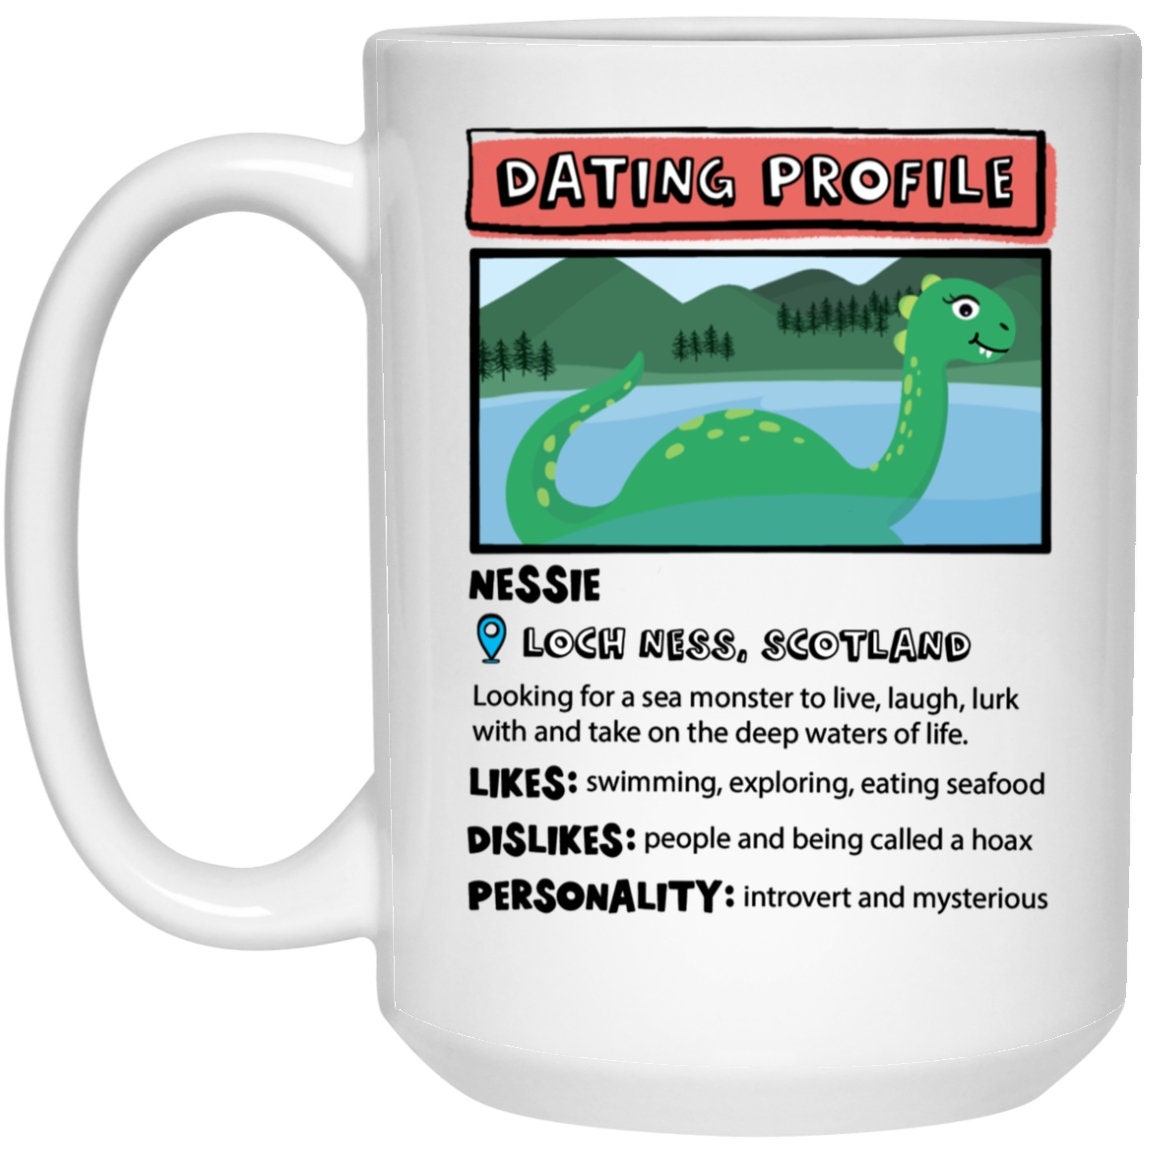 Nessie Dating Profile Mug Funny Loch Ness Monster Coffee Cup